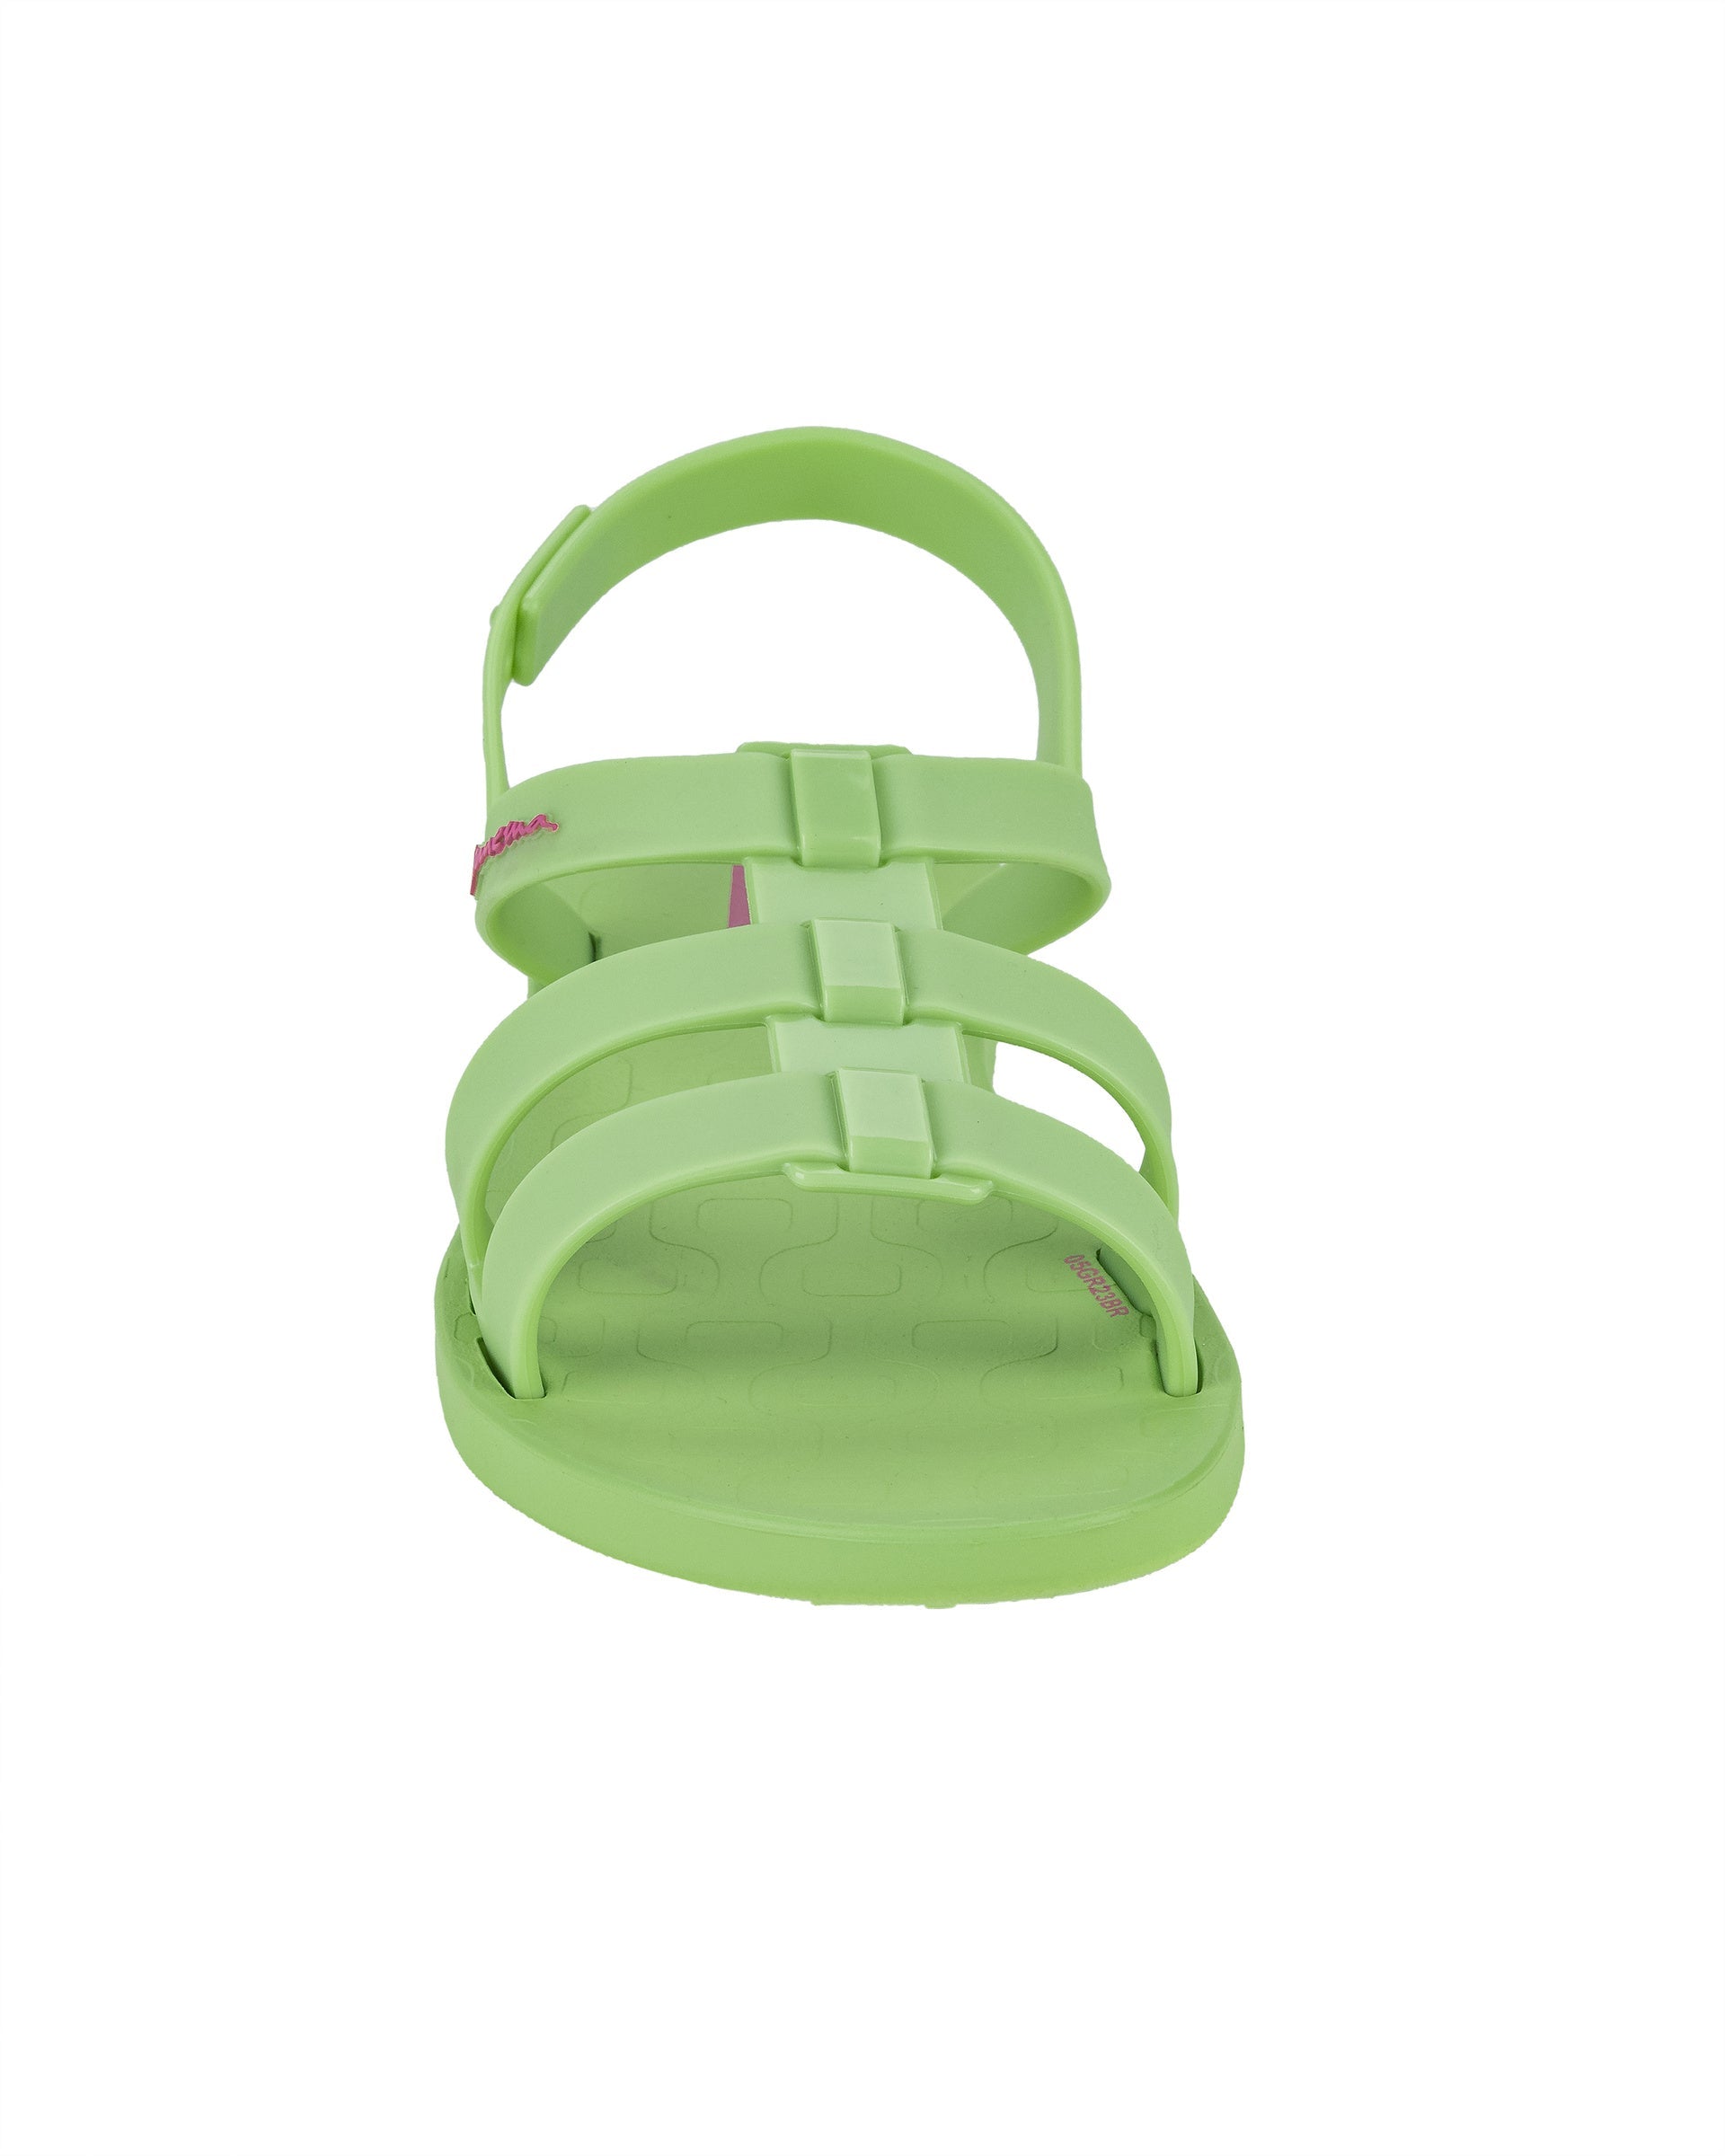 Front view of a green Ipanema Class Go women's sandal.